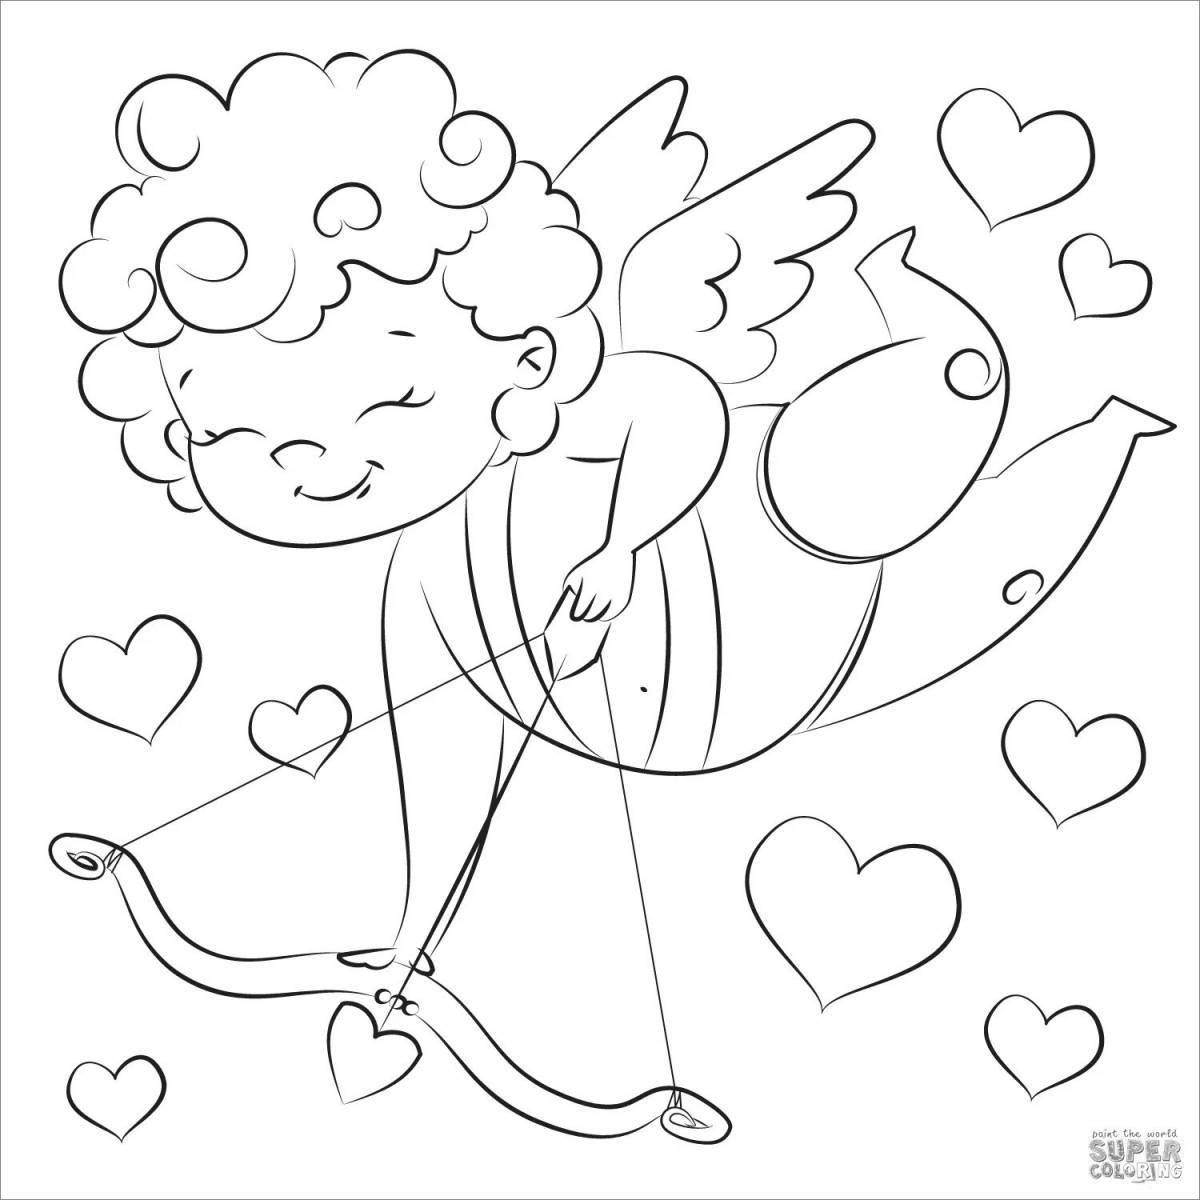 Coloring book playful cupid